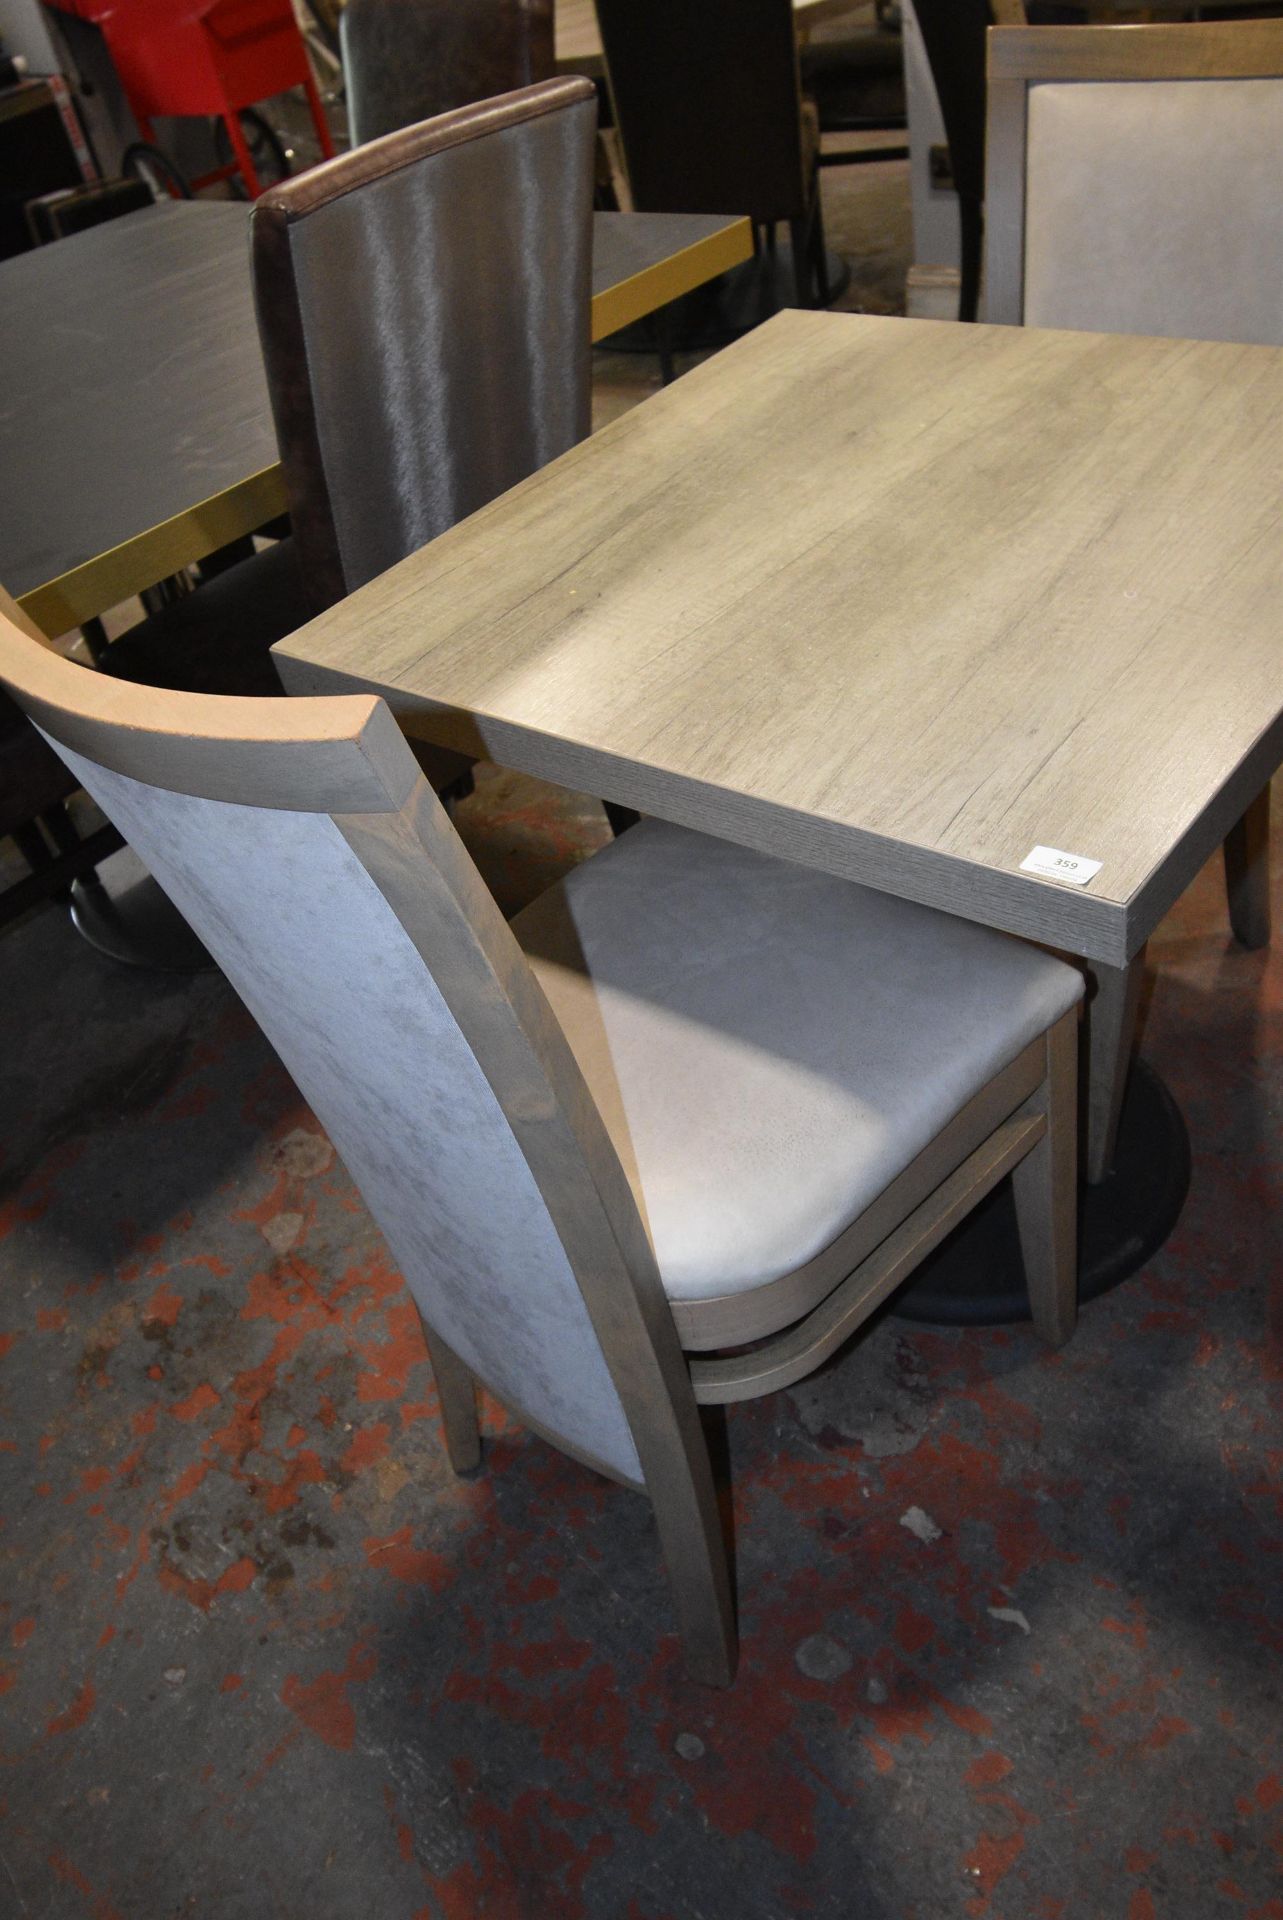 70cm Square Single Pedestal Table and Two Chairs - Image 2 of 2